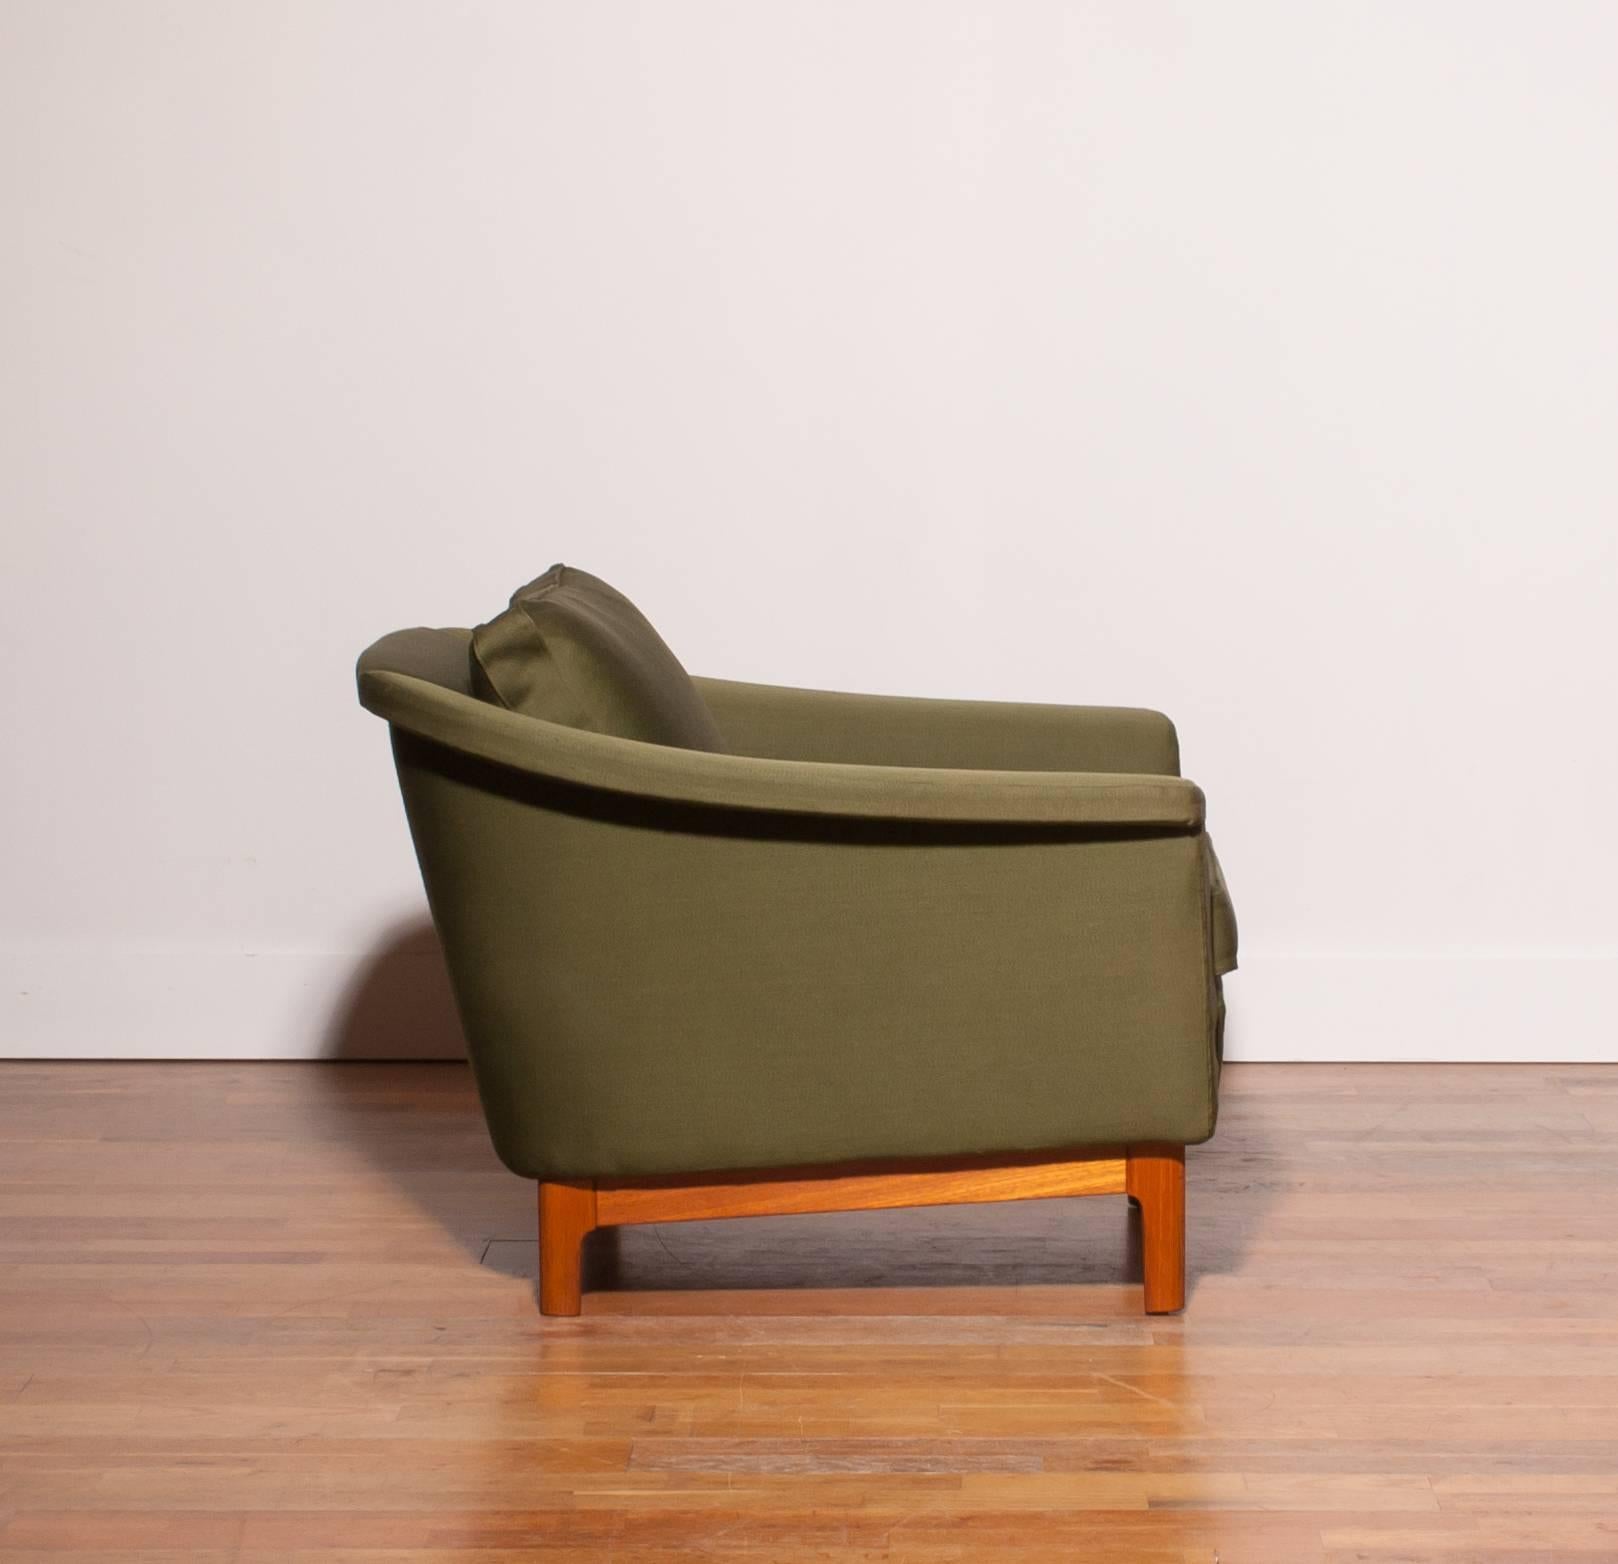 Swedish 1960s, Green Lounge Chair by Folke Ohlsson for DUX.